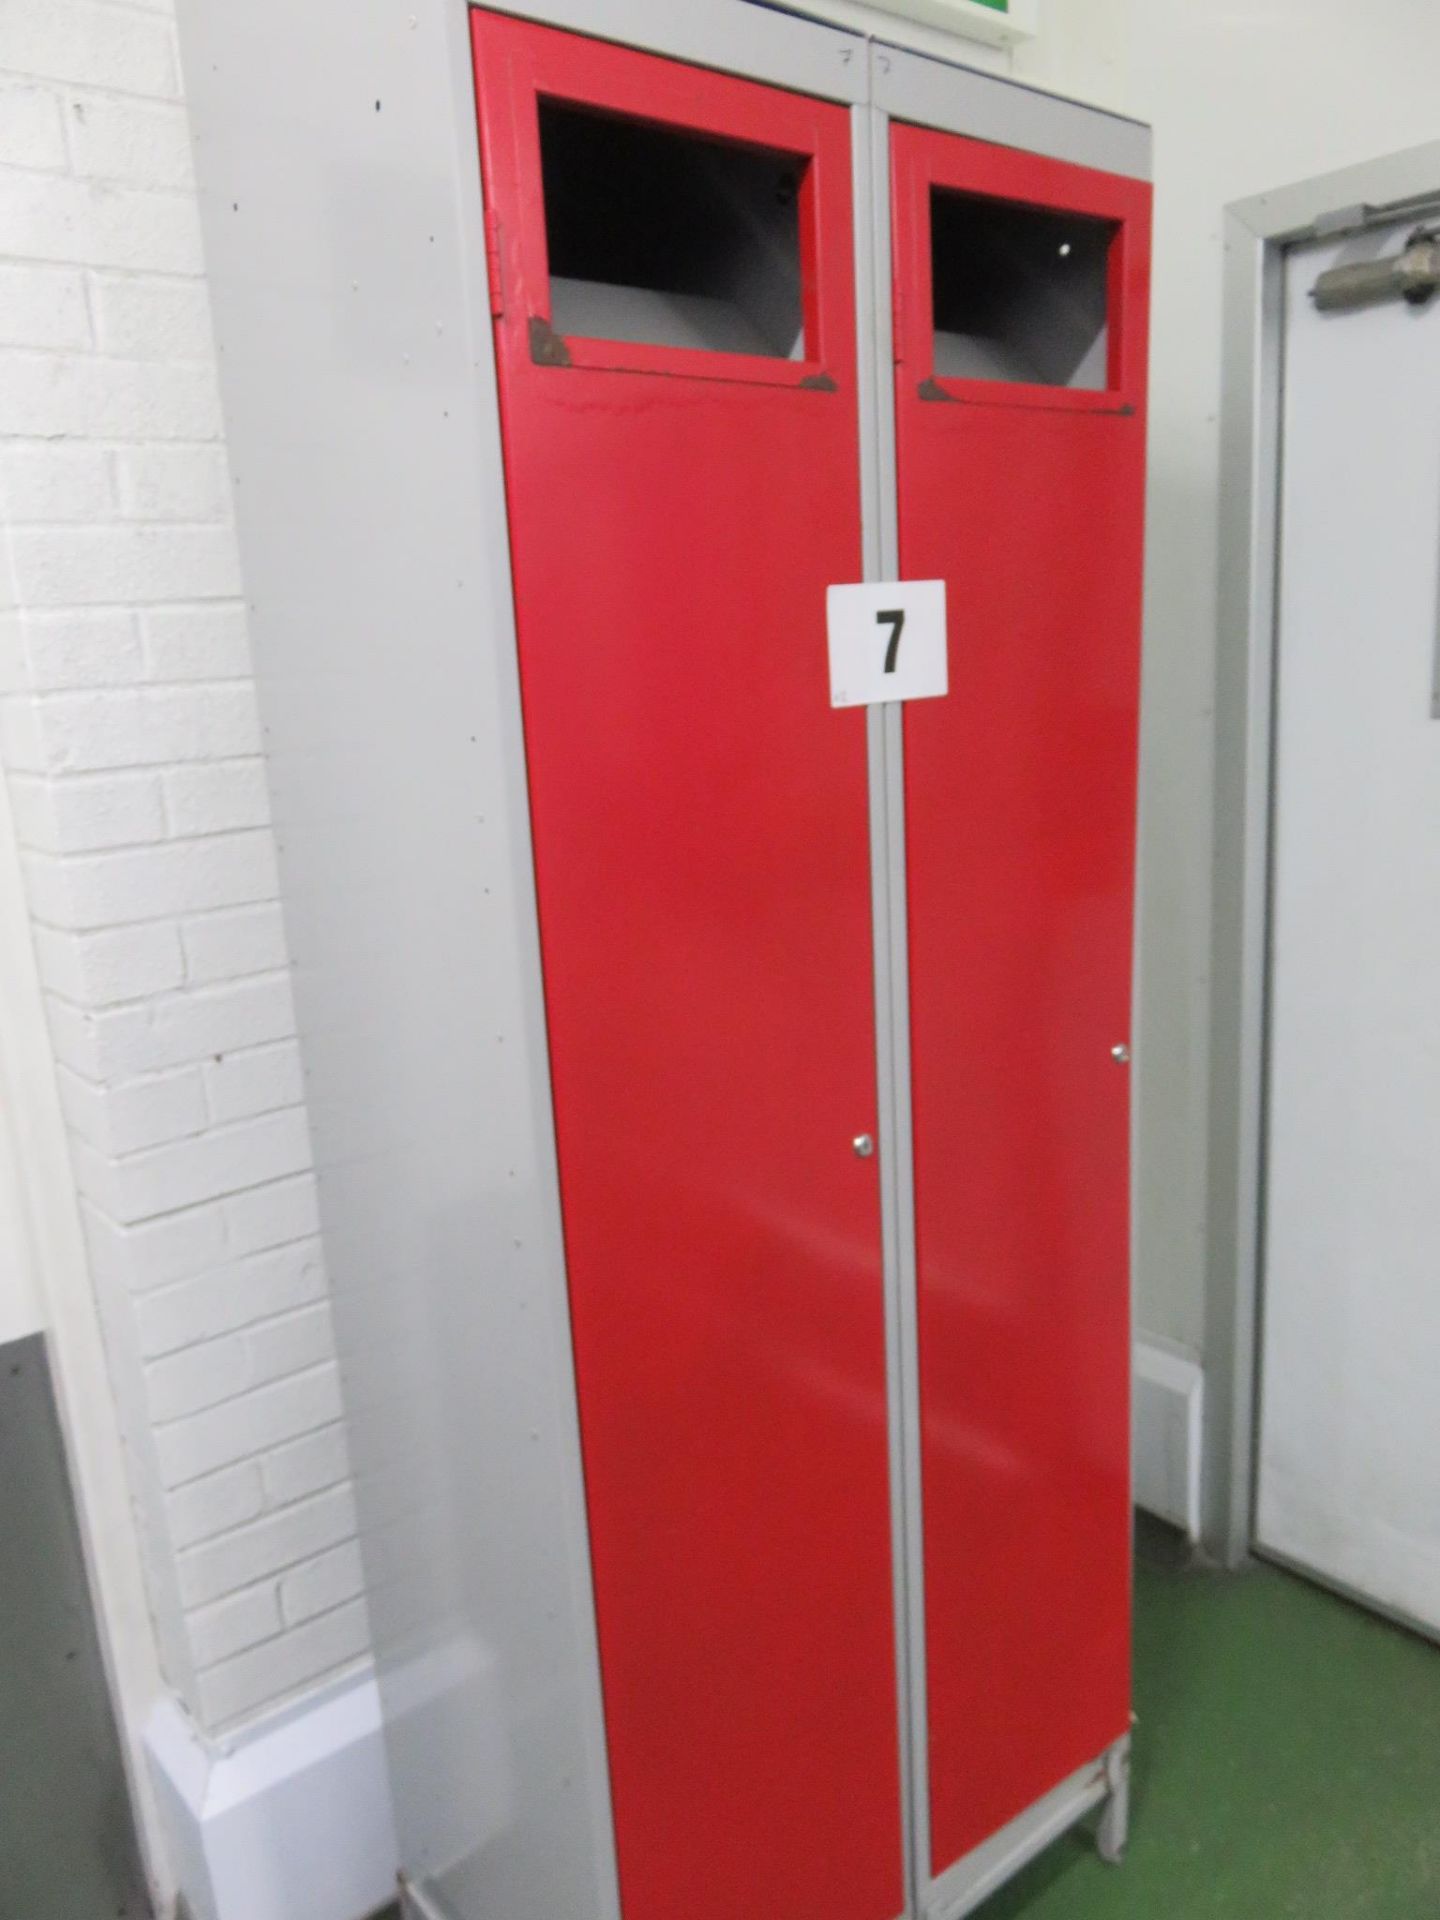 2 x Laundry Lockers. Lift out £10